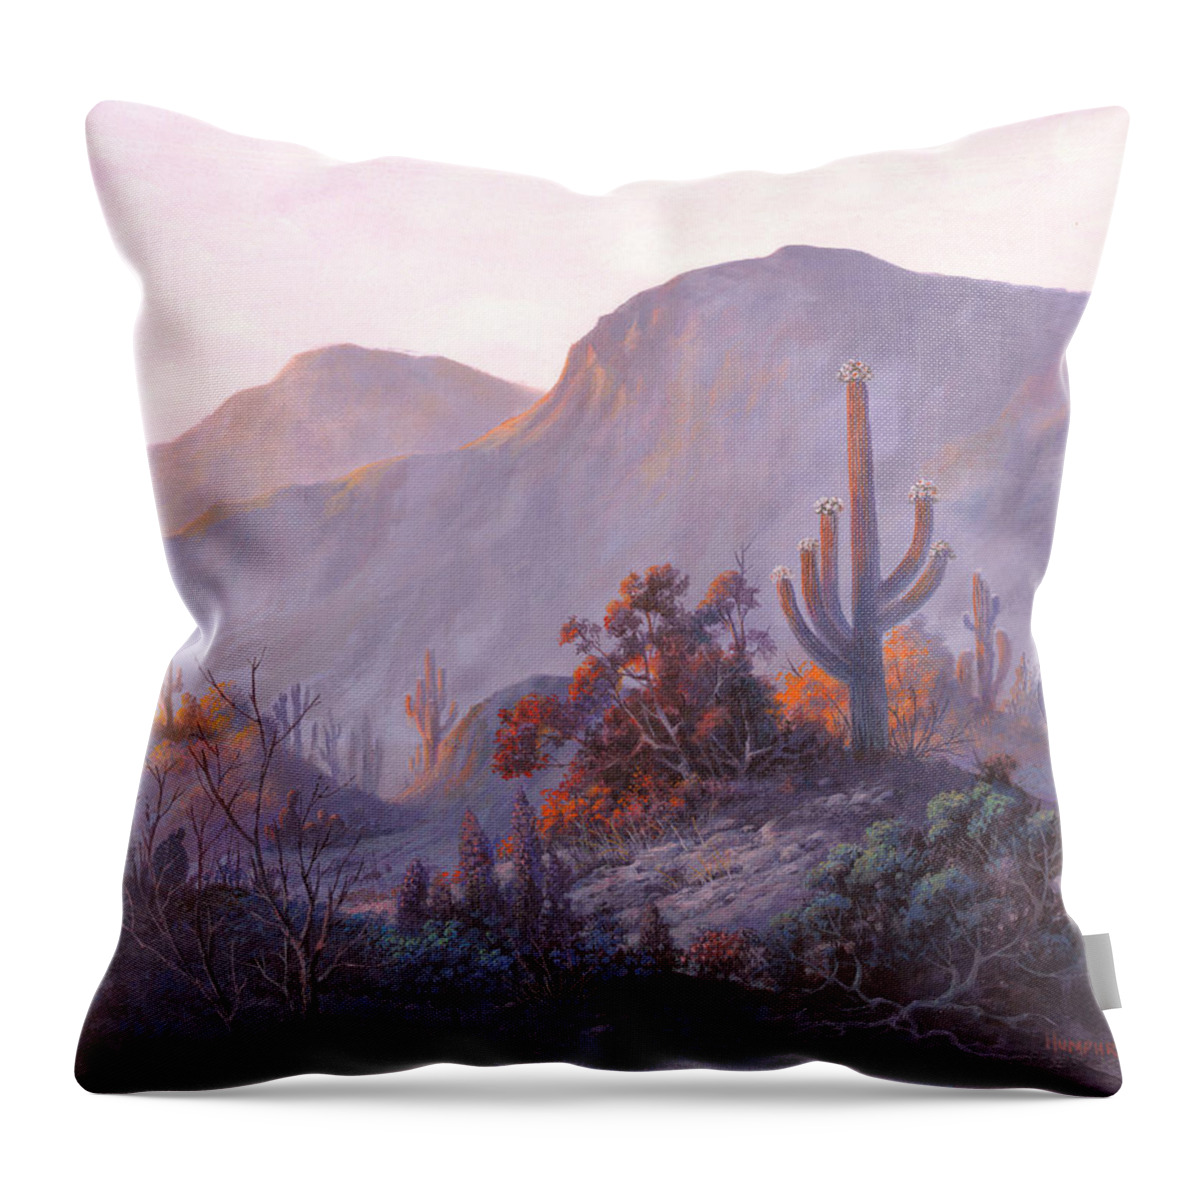 Michael Humphries Throw Pillow featuring the painting Desert Dessert by Michael Humphries